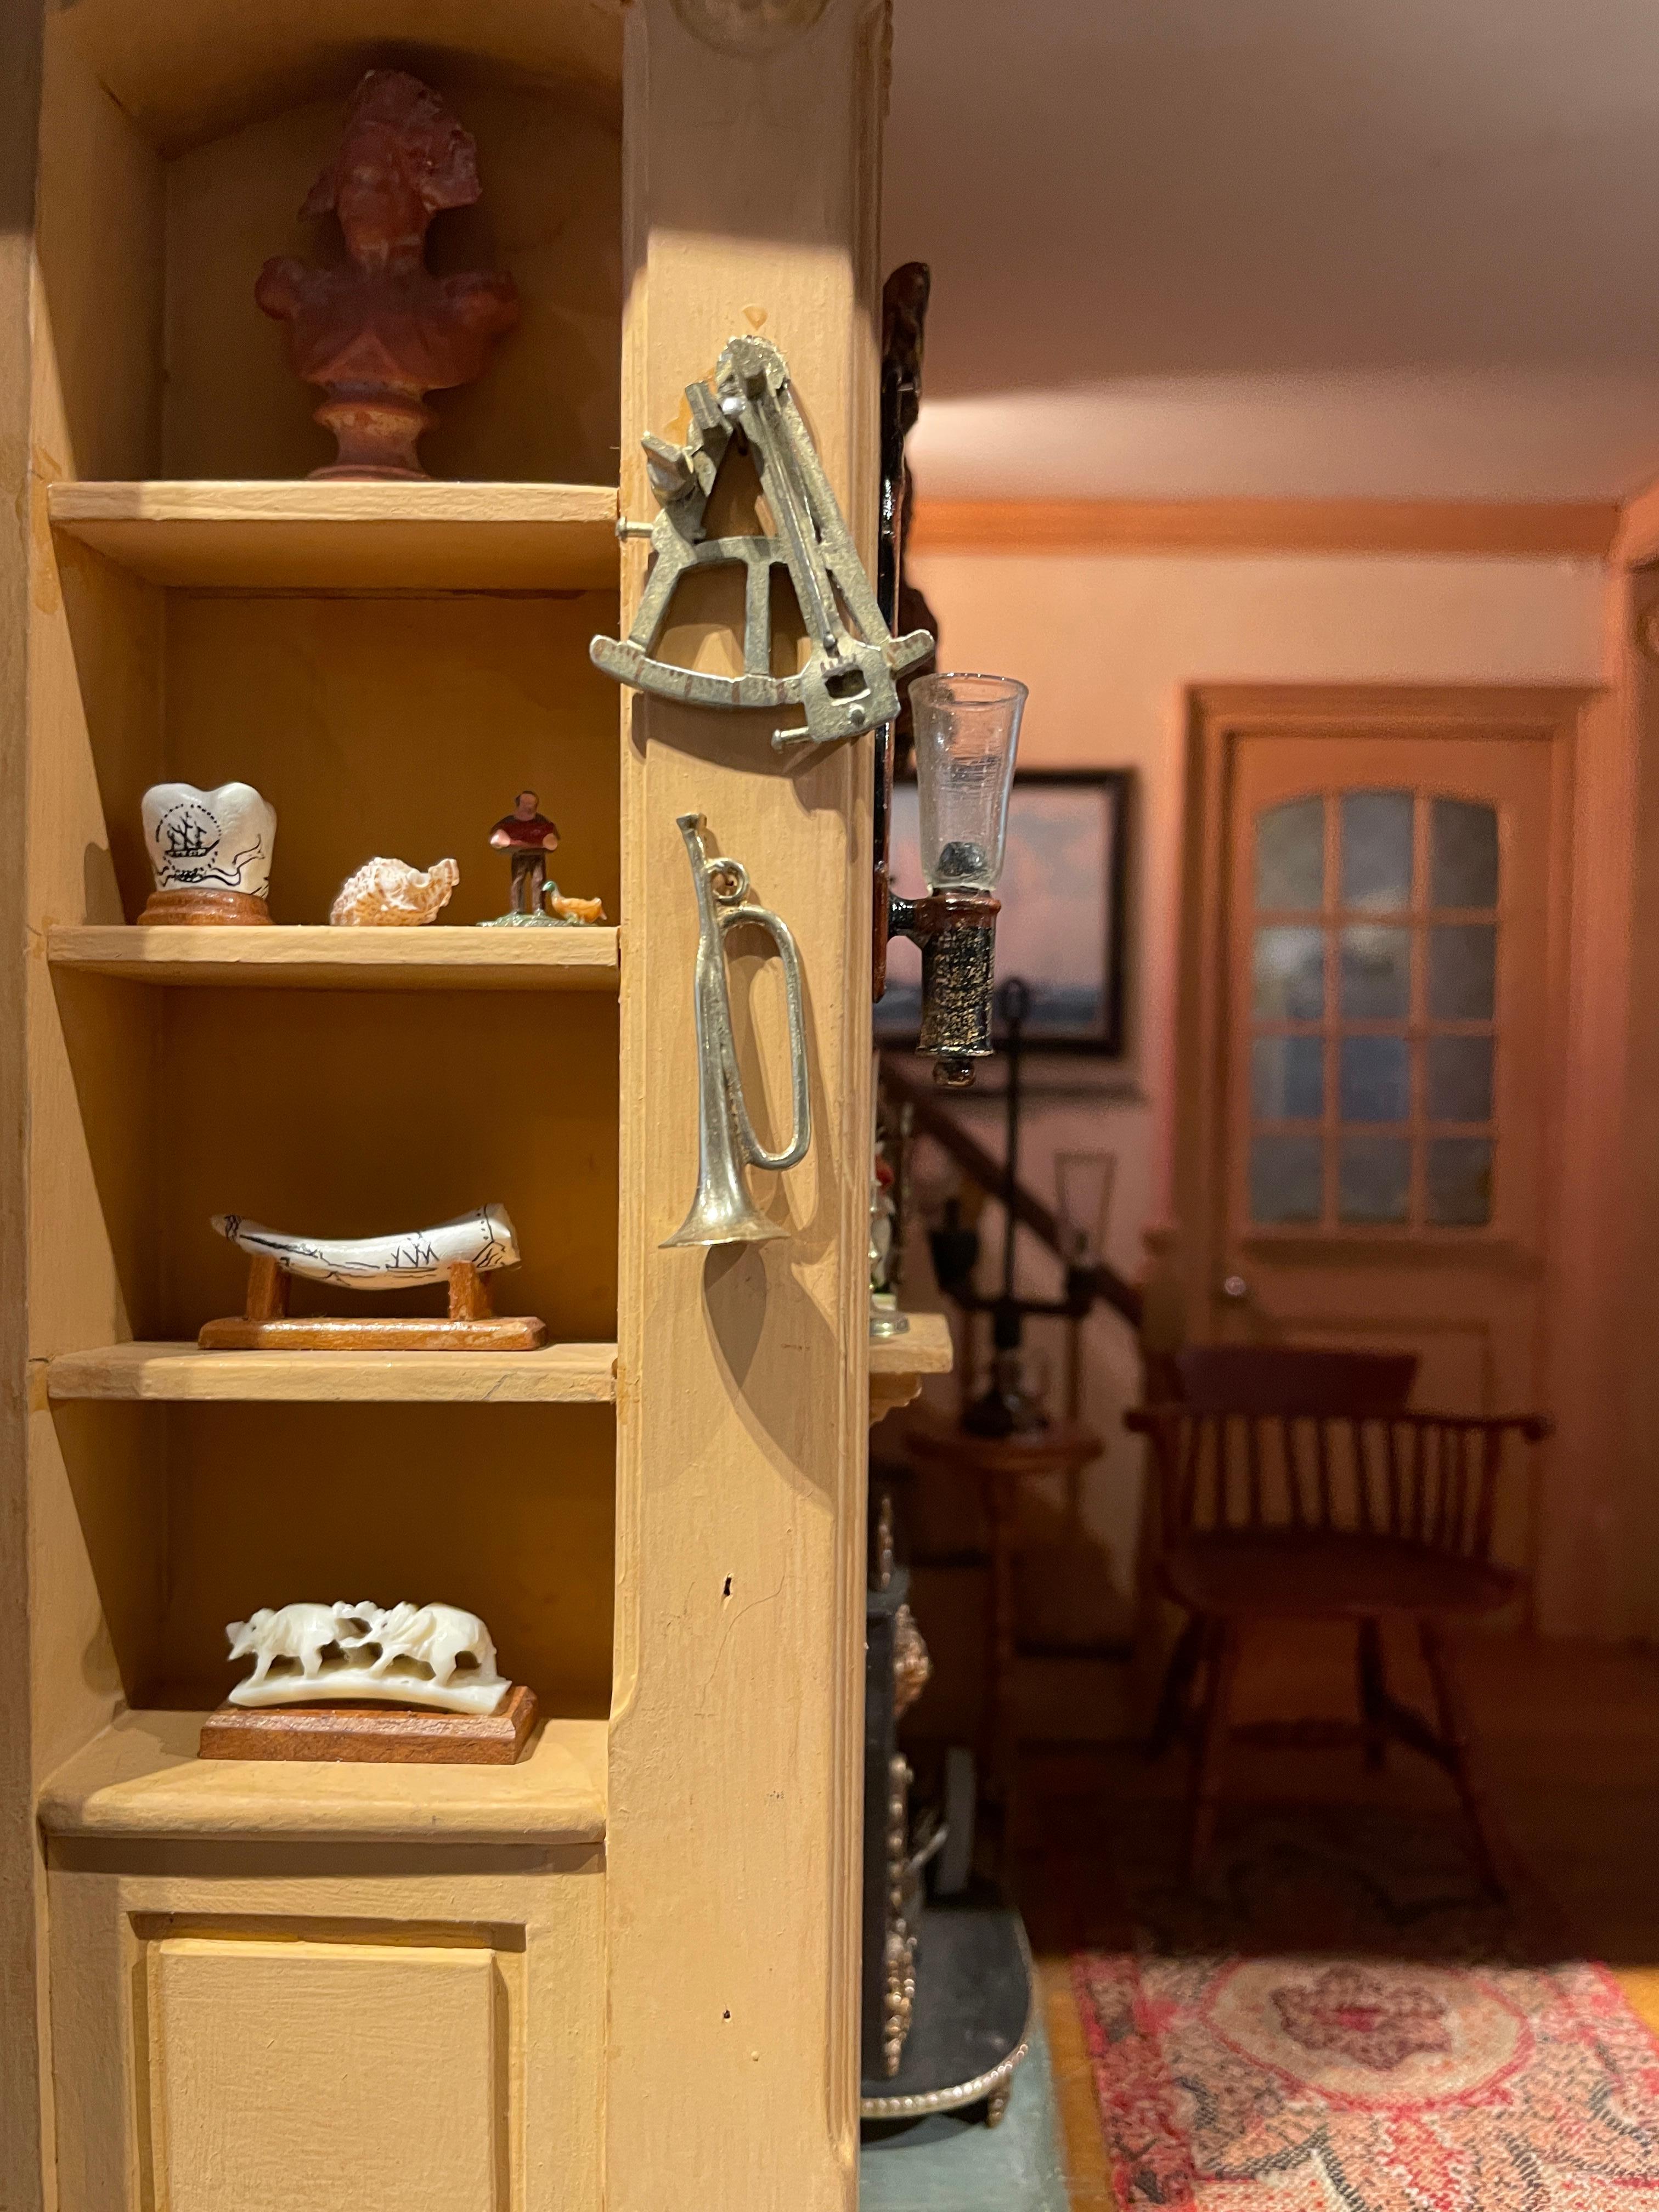 This highly detailed Miniature Room of a Retired Whaling Captain's Study in Nantucket is an excellent example of the true talent of Eugene Kupjack. Tiny scrimshaw and knick-knacks fill the shelves while the perfectly proportioned furniture adorns